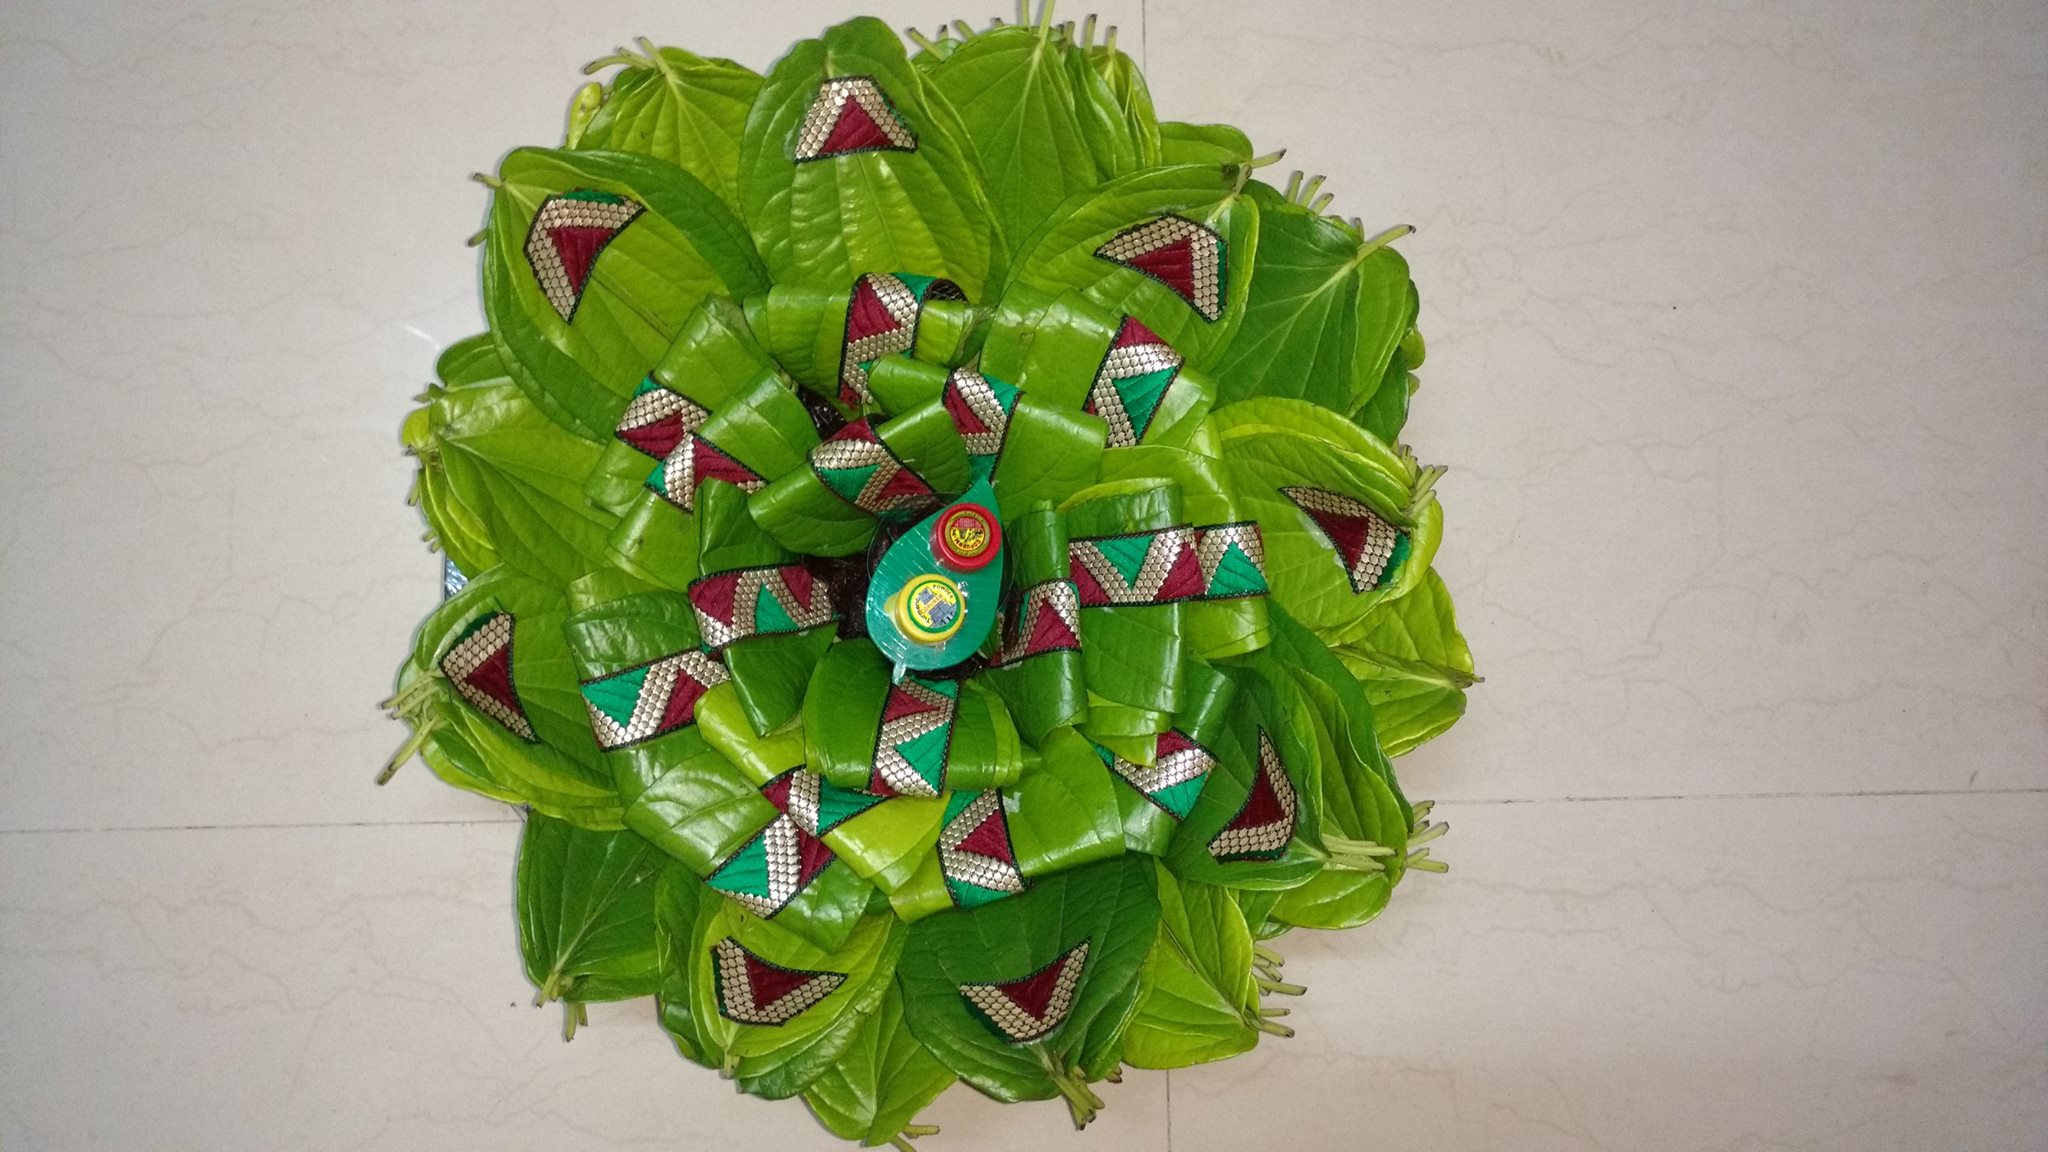 20.Betel Leaves with lace work decoration